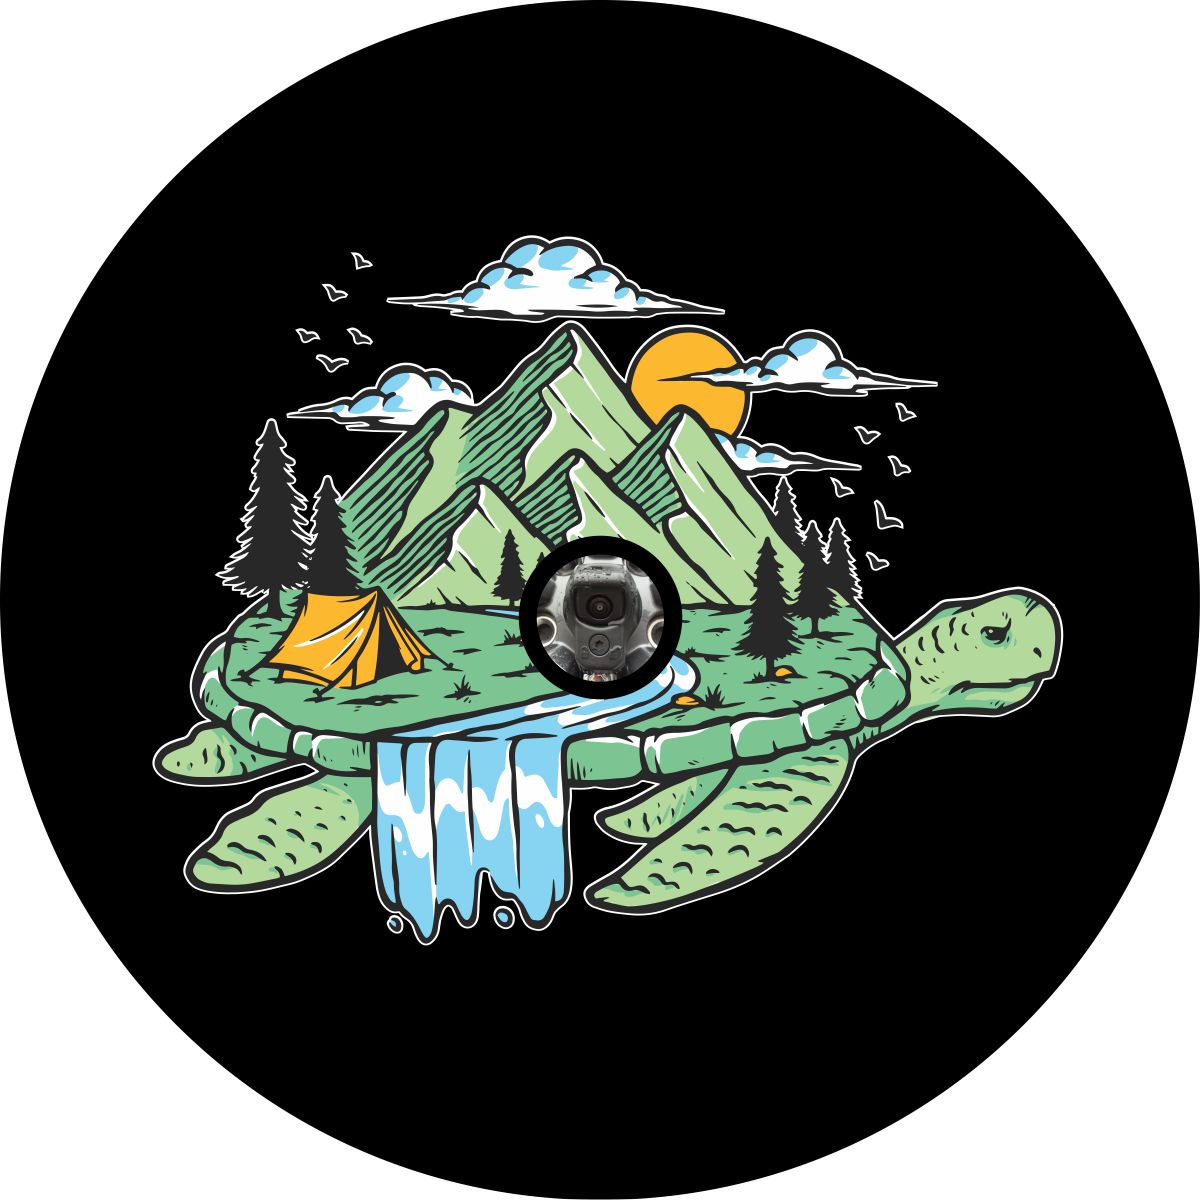 Back up camera spare tire cover design. Camping on a turtle island spare tire cover. Beautiful camping scene in the mountains on top of a turtle. Custom spare tire cover design. Printed to order on black vinyl weatherproof material.